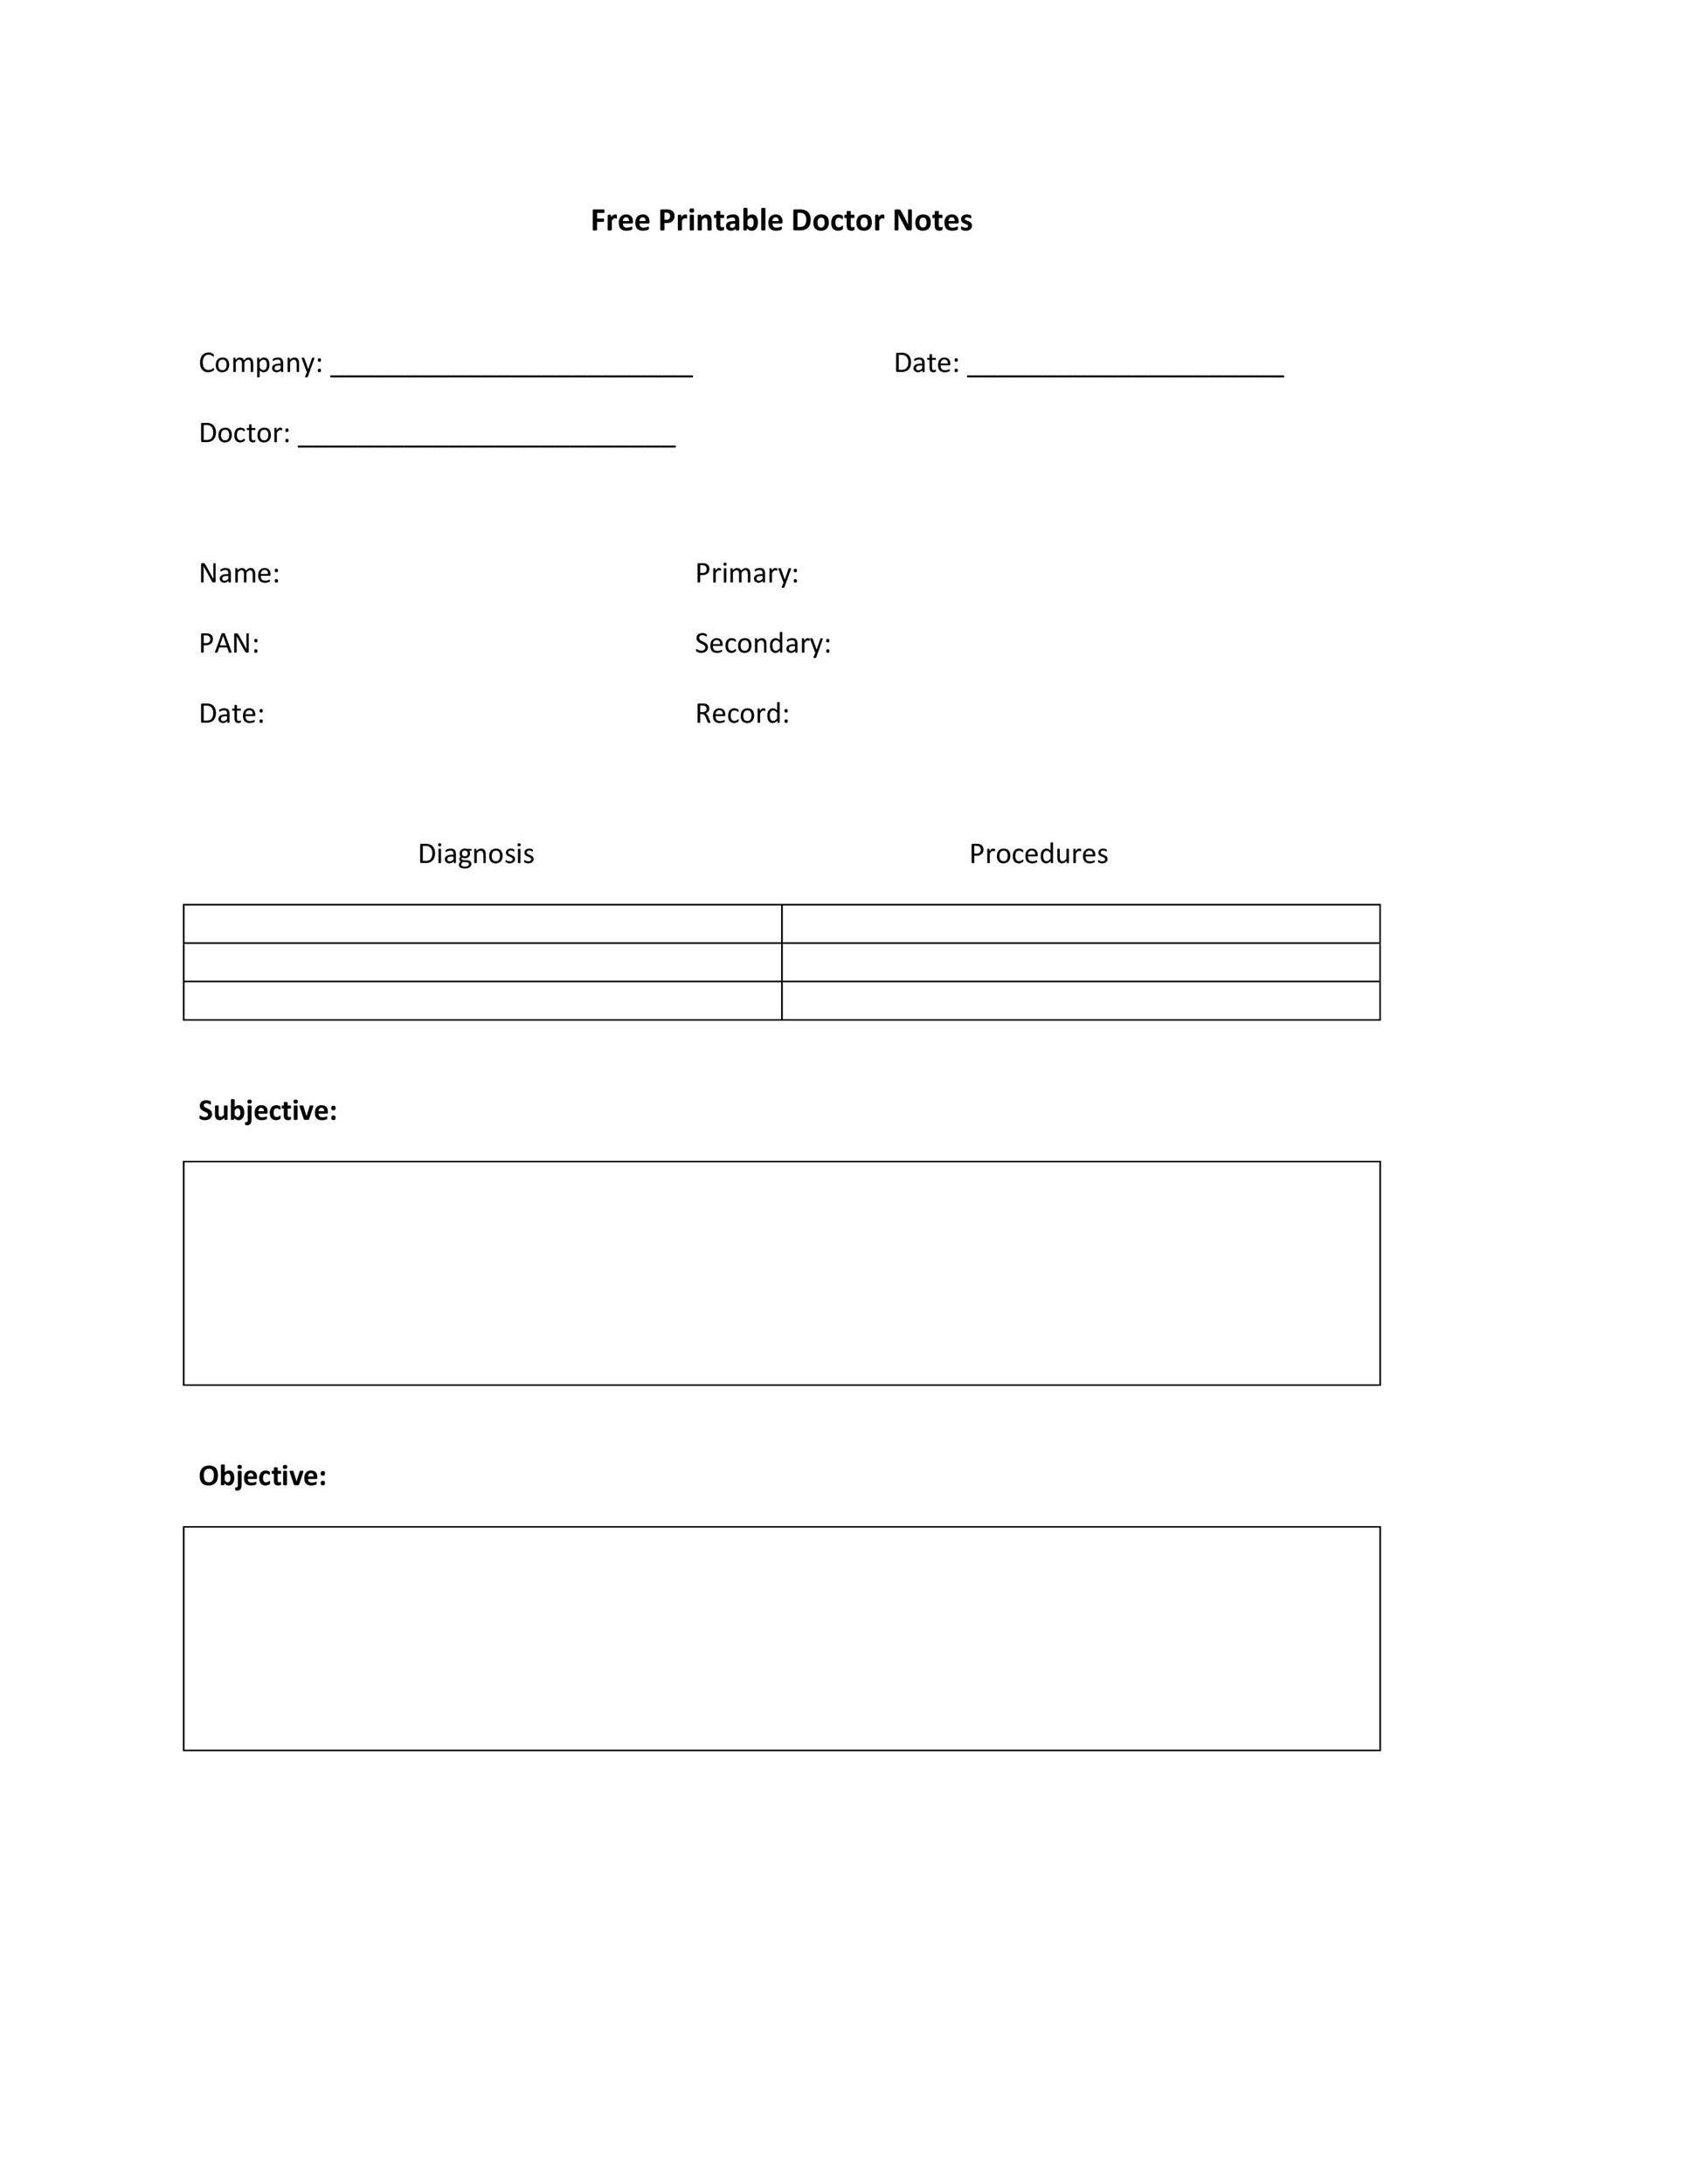 Emergency Room Doctor Note Template TUTORE ORG Master of Documents